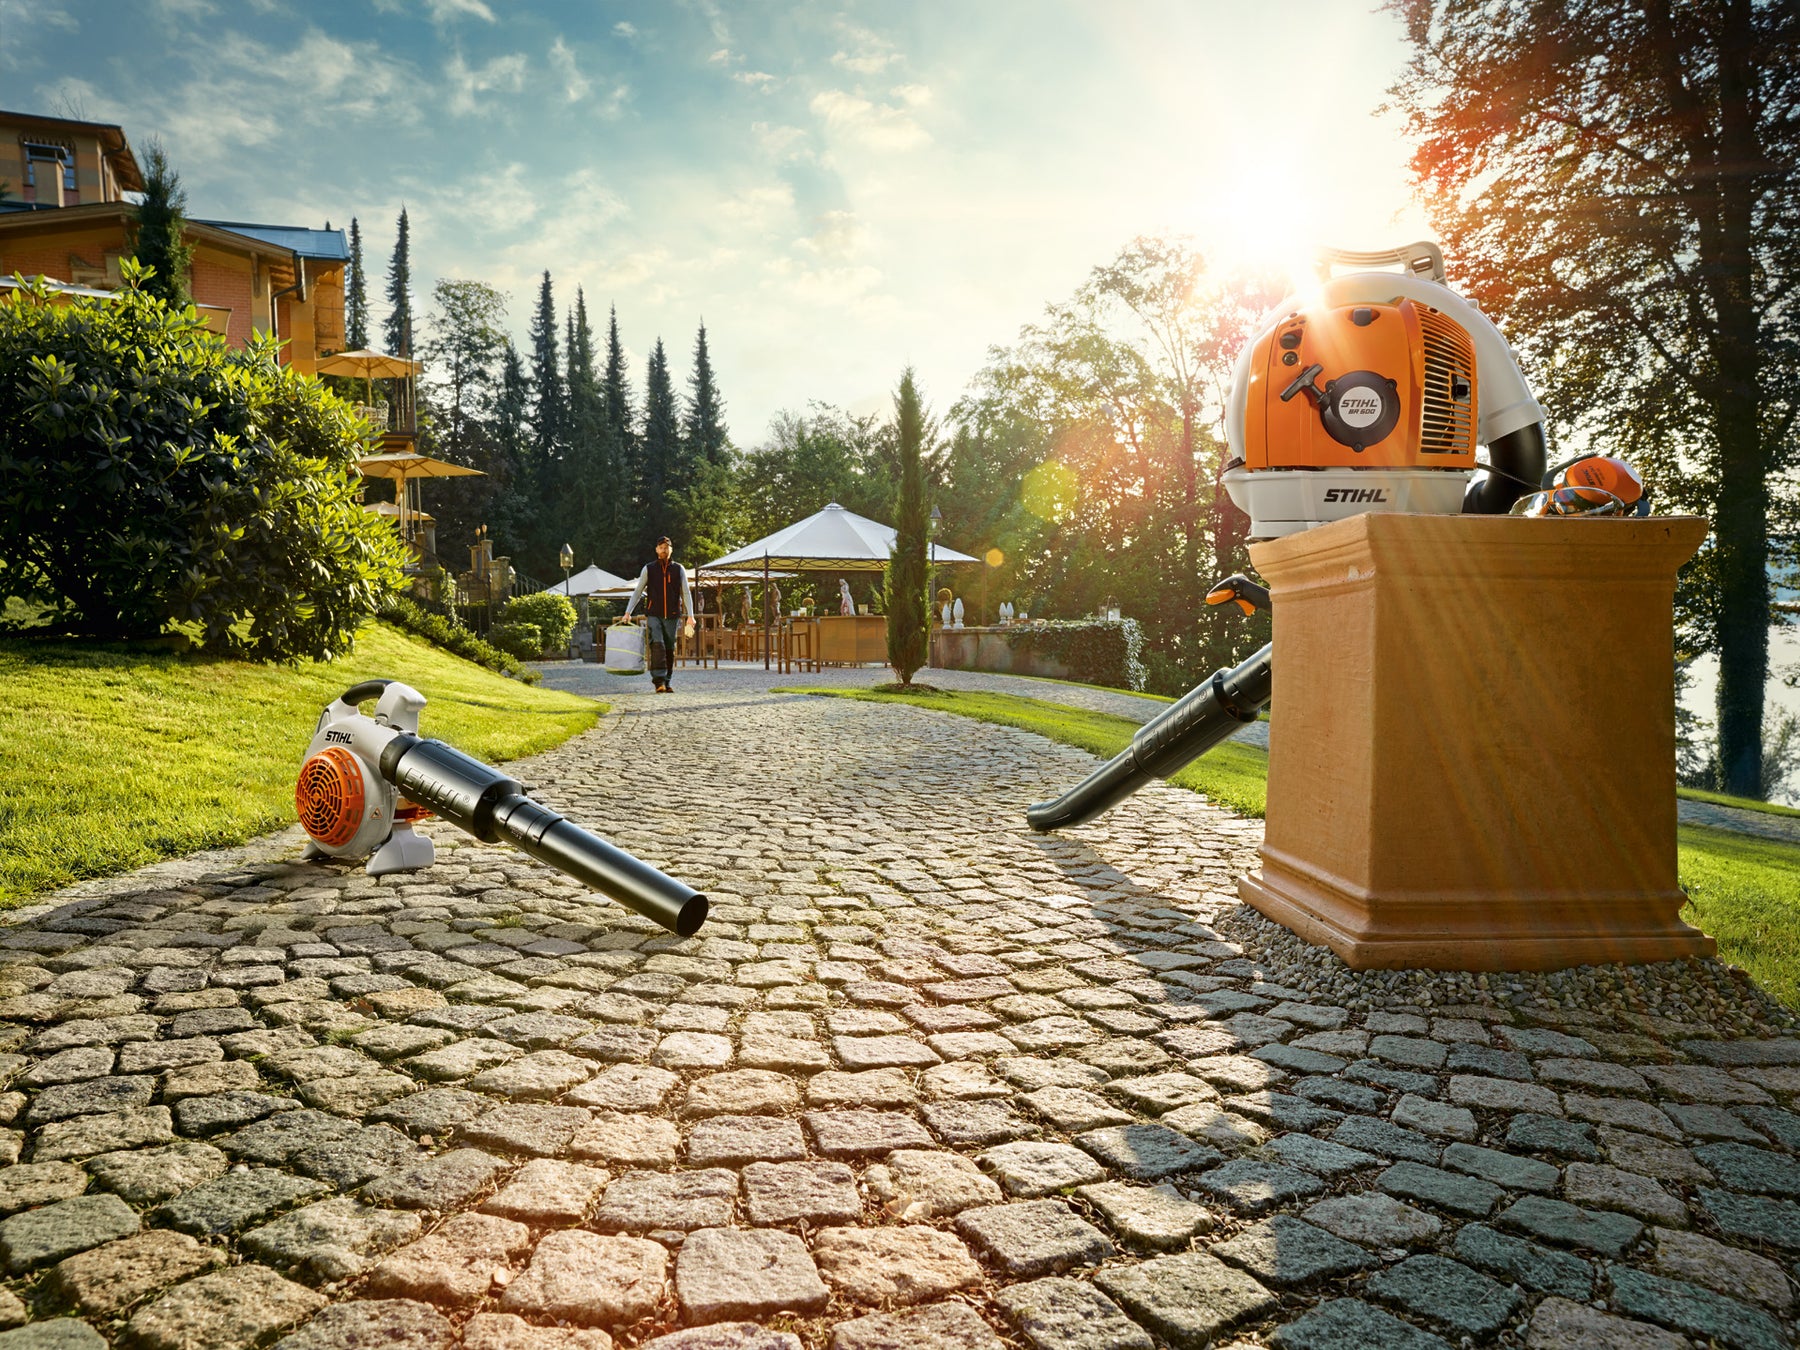 Stihl Leaf Blowers - What you need to know!